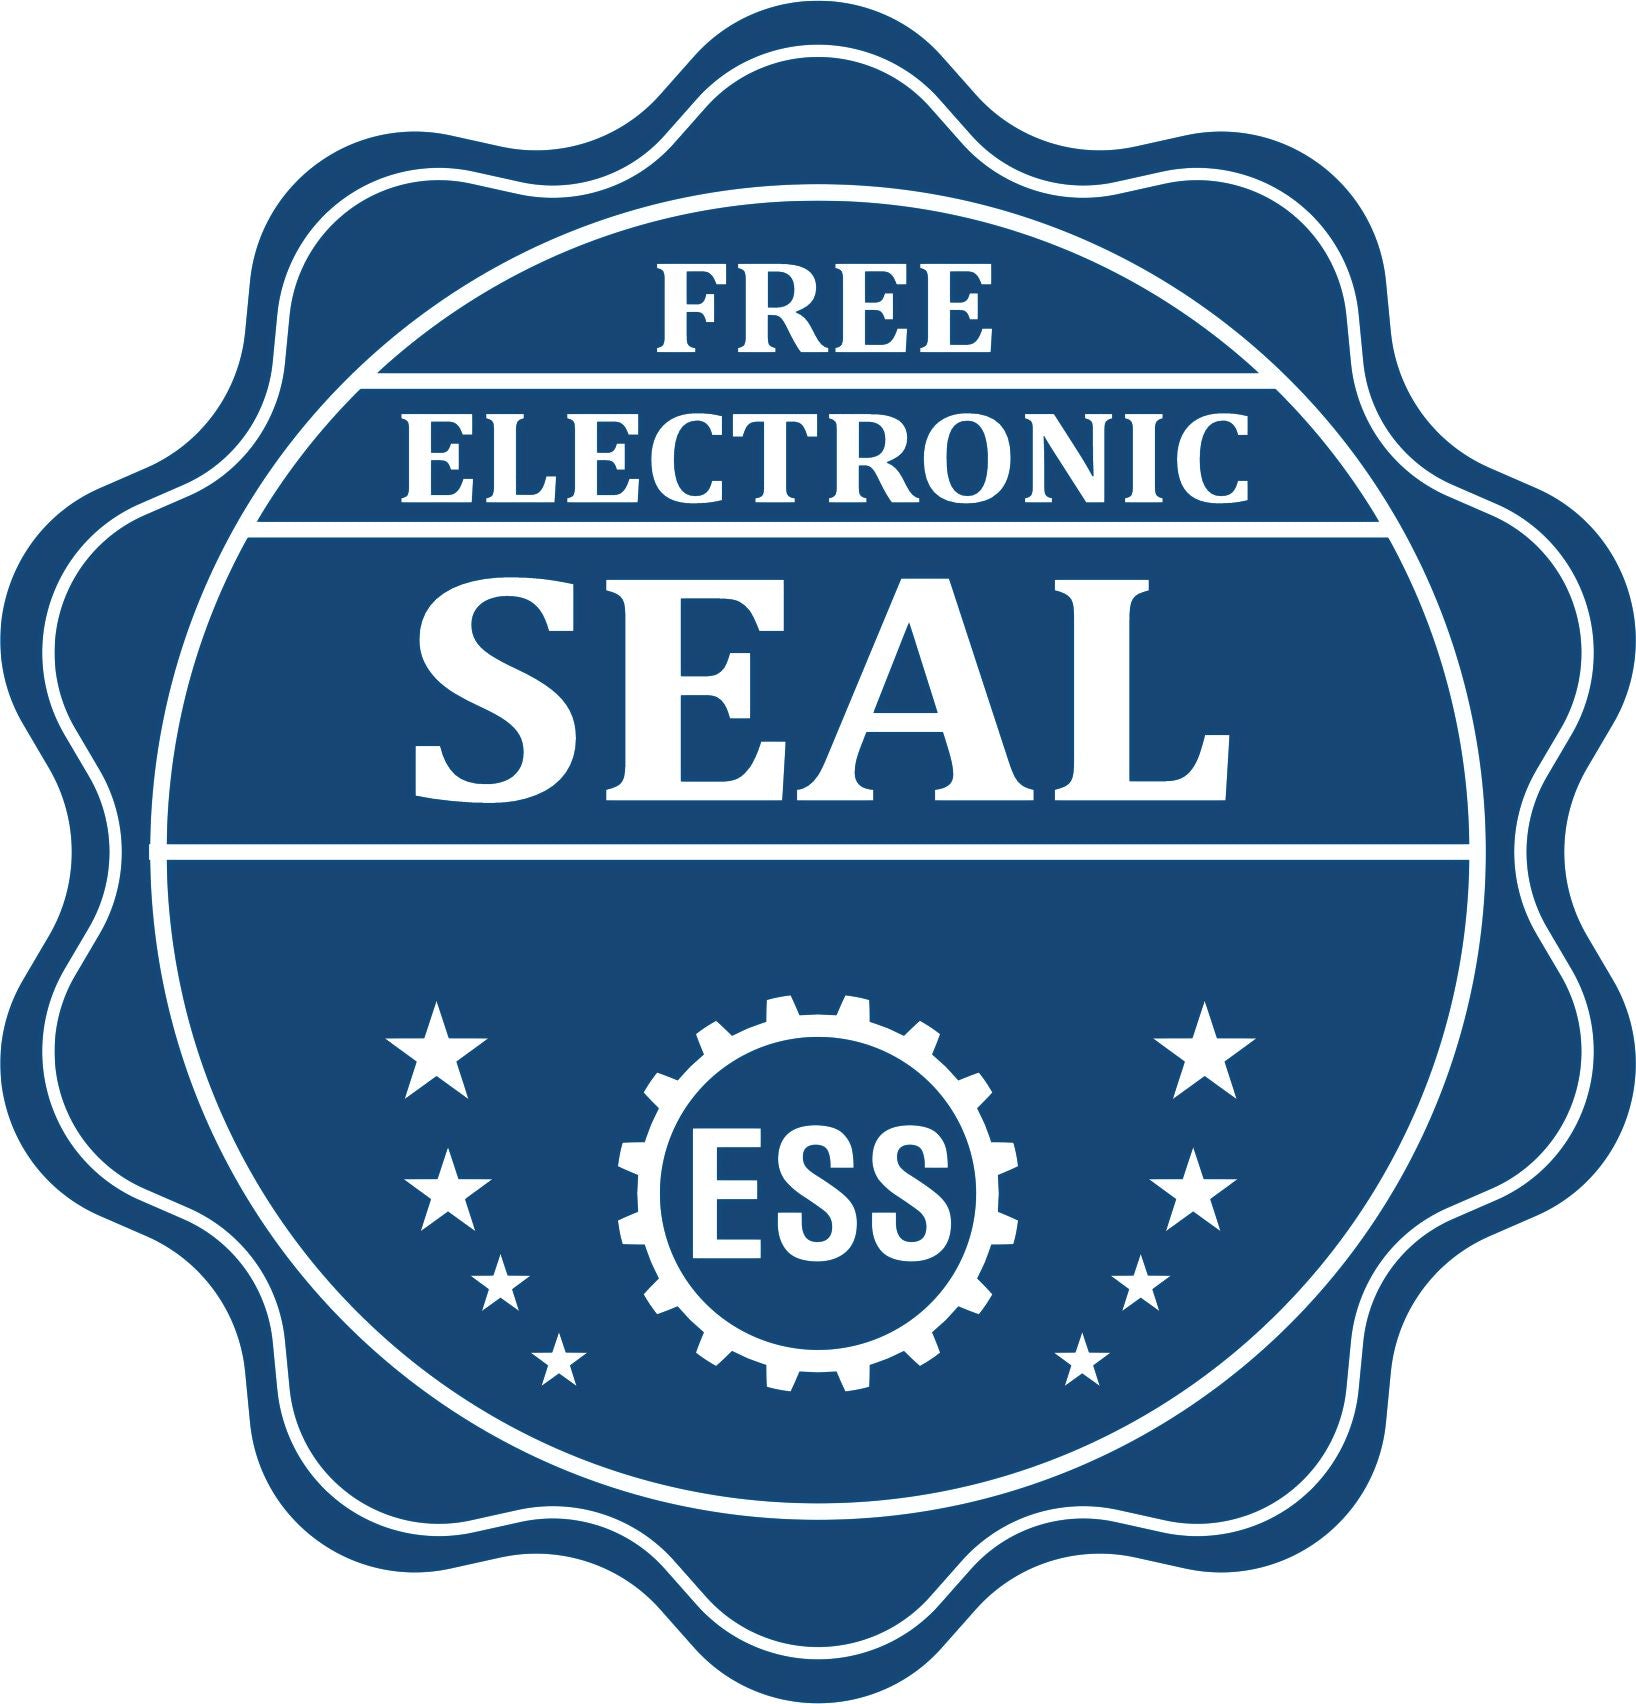 A badge showing a free electronic seal for the Long Reach Hawaii PE Seal with stars and the ESS gear on the emblem.